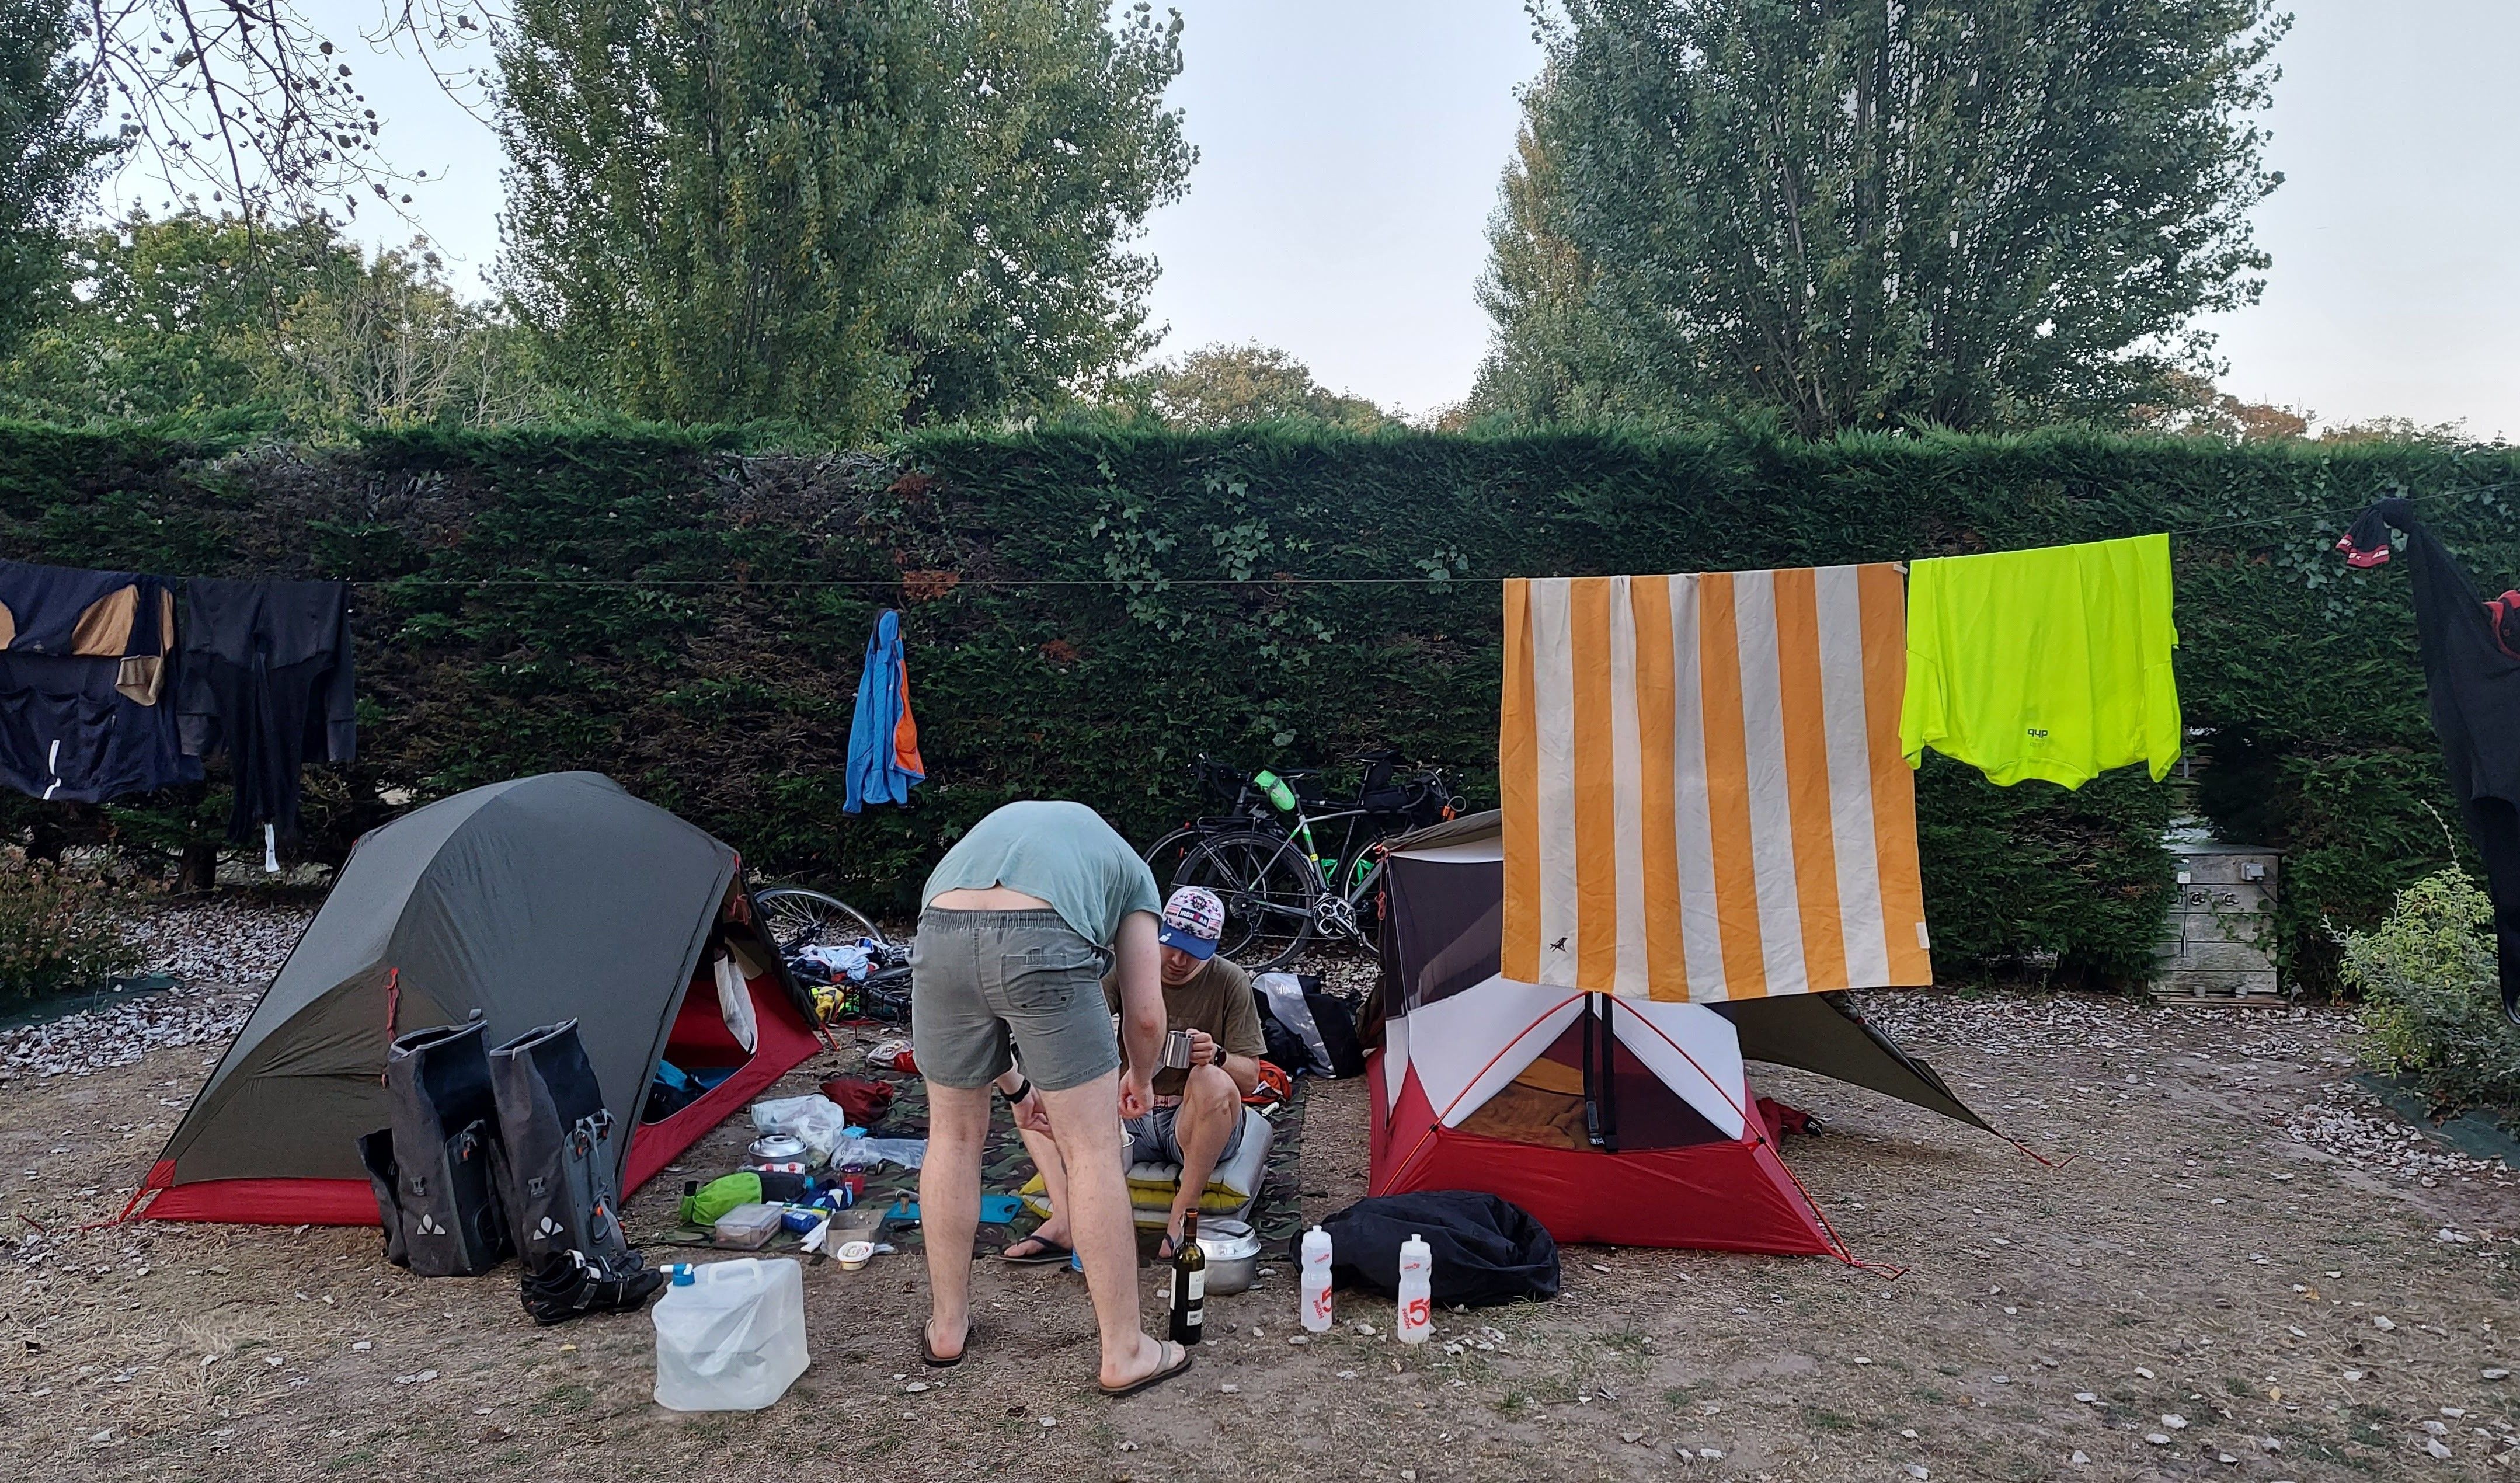 Students on campsite with bikes